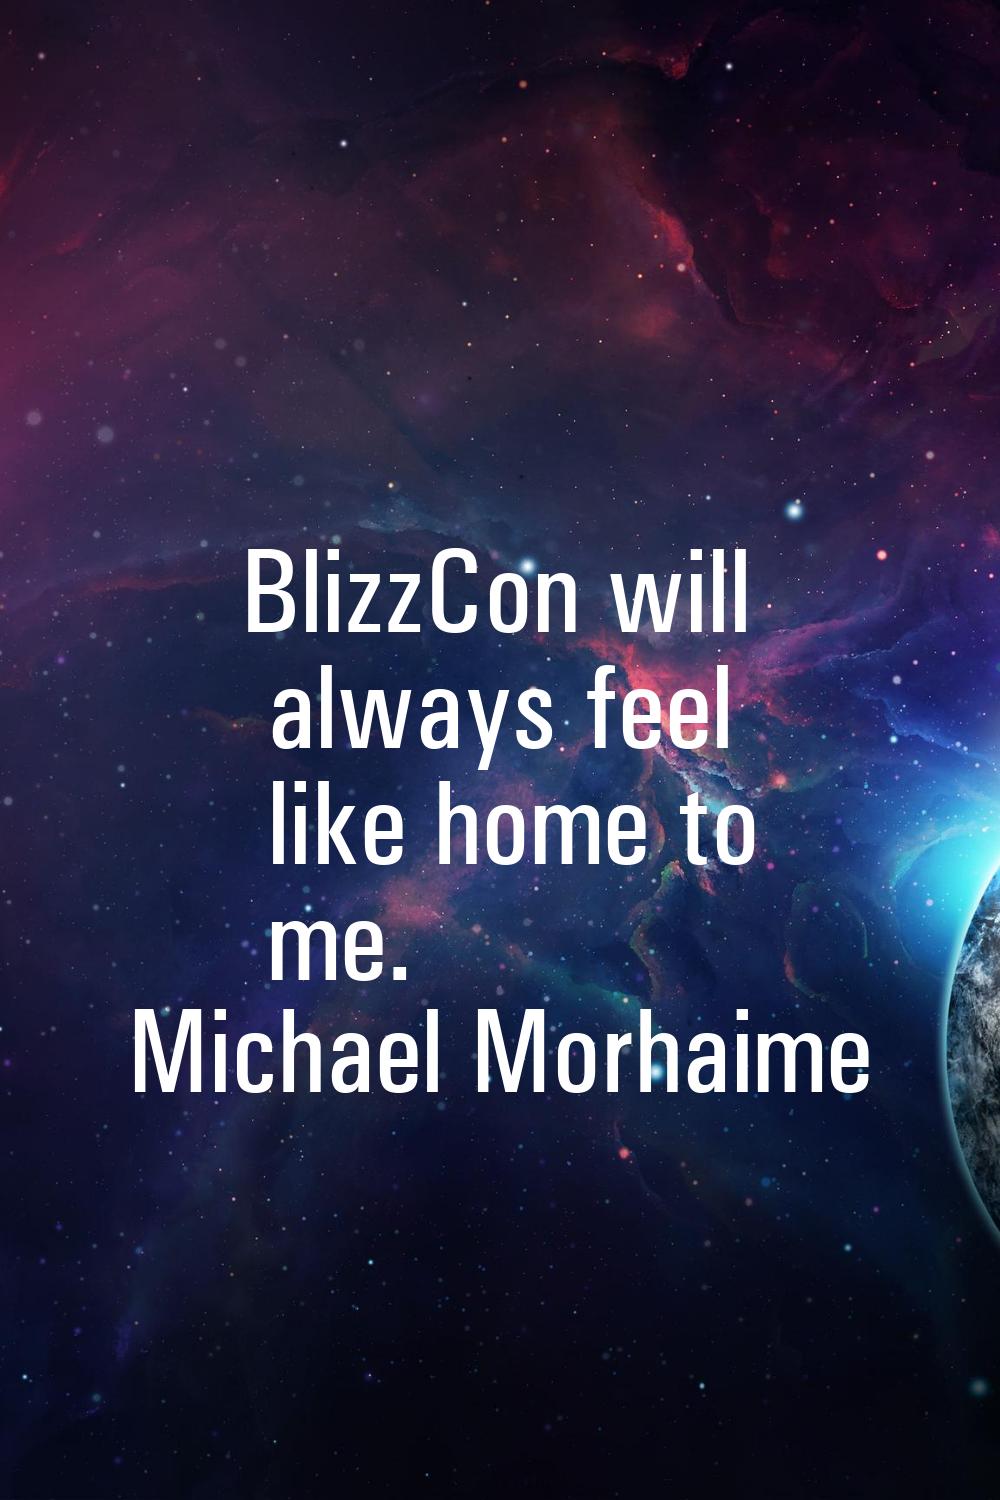 BlizzCon will always feel like home to me.